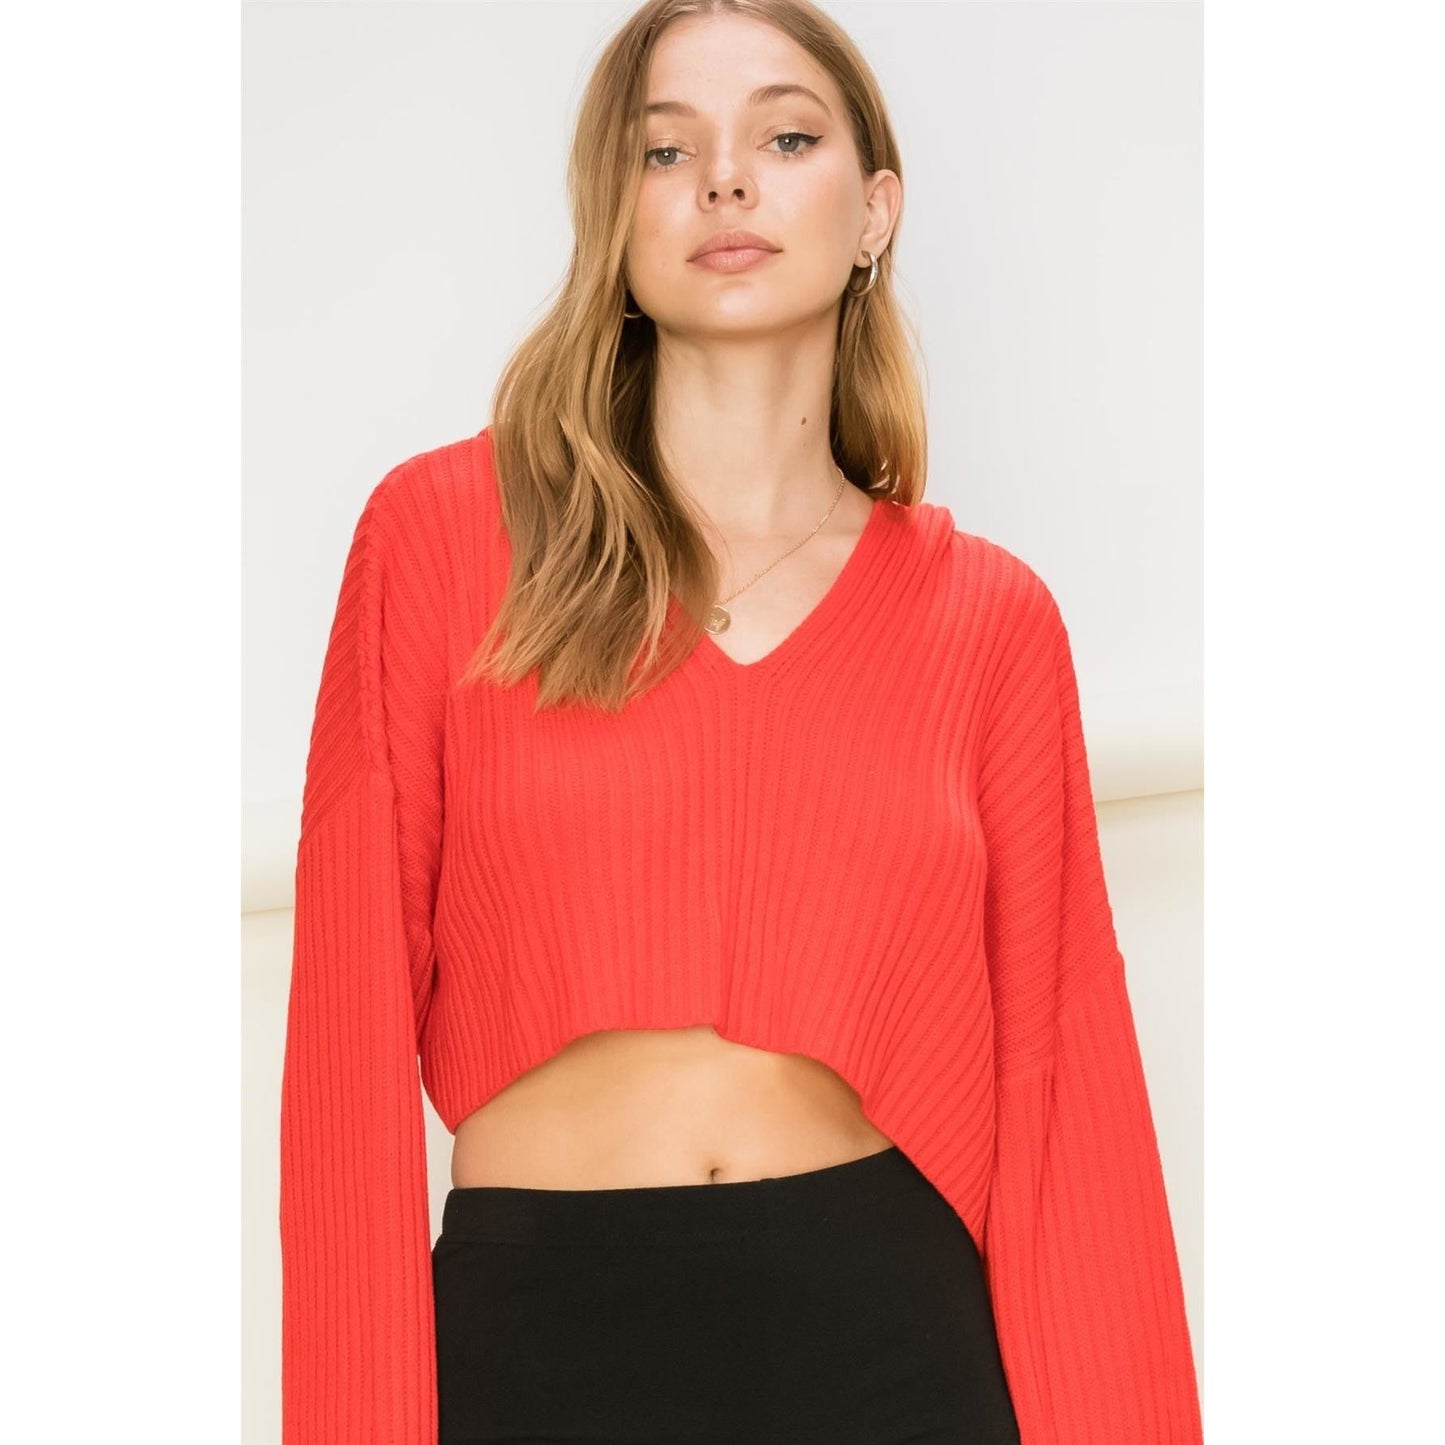 The Creswell Cropped Knit Top